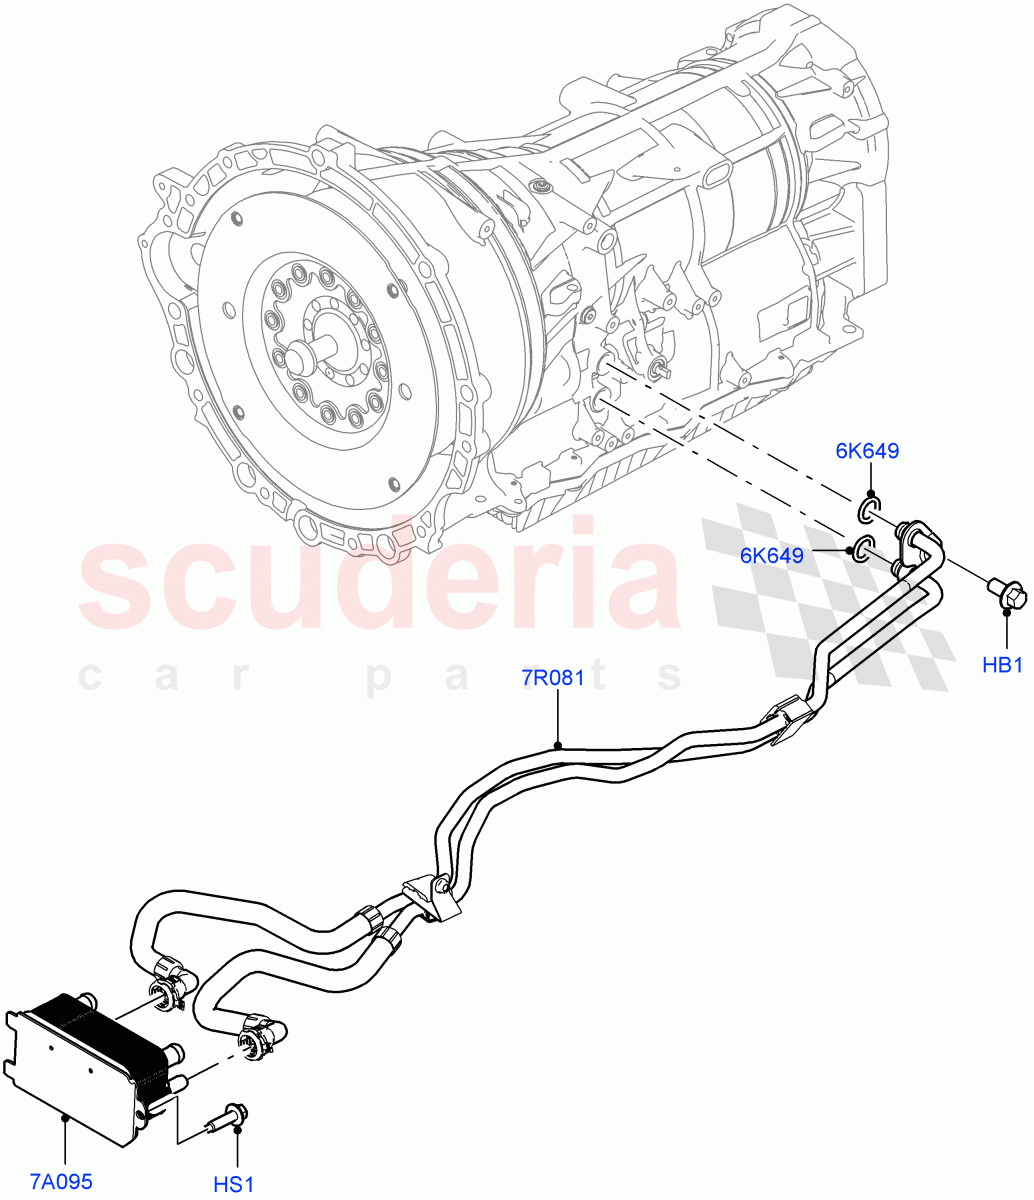 Transmission Cooling Systems(Solihull Plant Build)(2.0L I4 High DOHC AJ200 Petrol,8 Speed Auto Trans ZF 8HP45)((V)FROMJA000001) of Land Rover Land Rover Discovery 5 (2017+) [3.0 I6 Turbo Diesel AJ20D6]